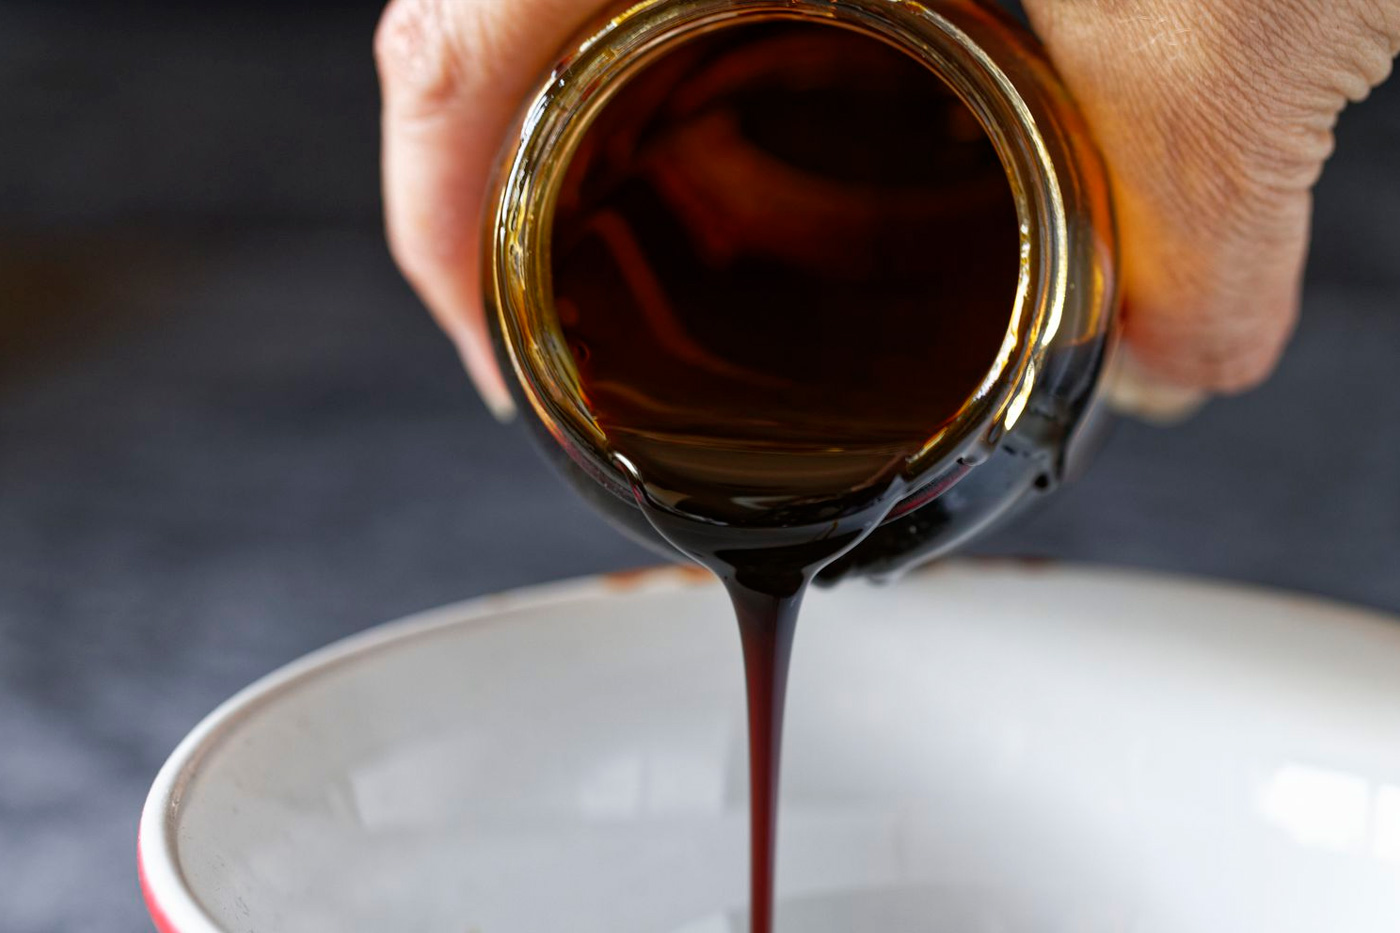 Can You Pour Molasses Down The Drain?